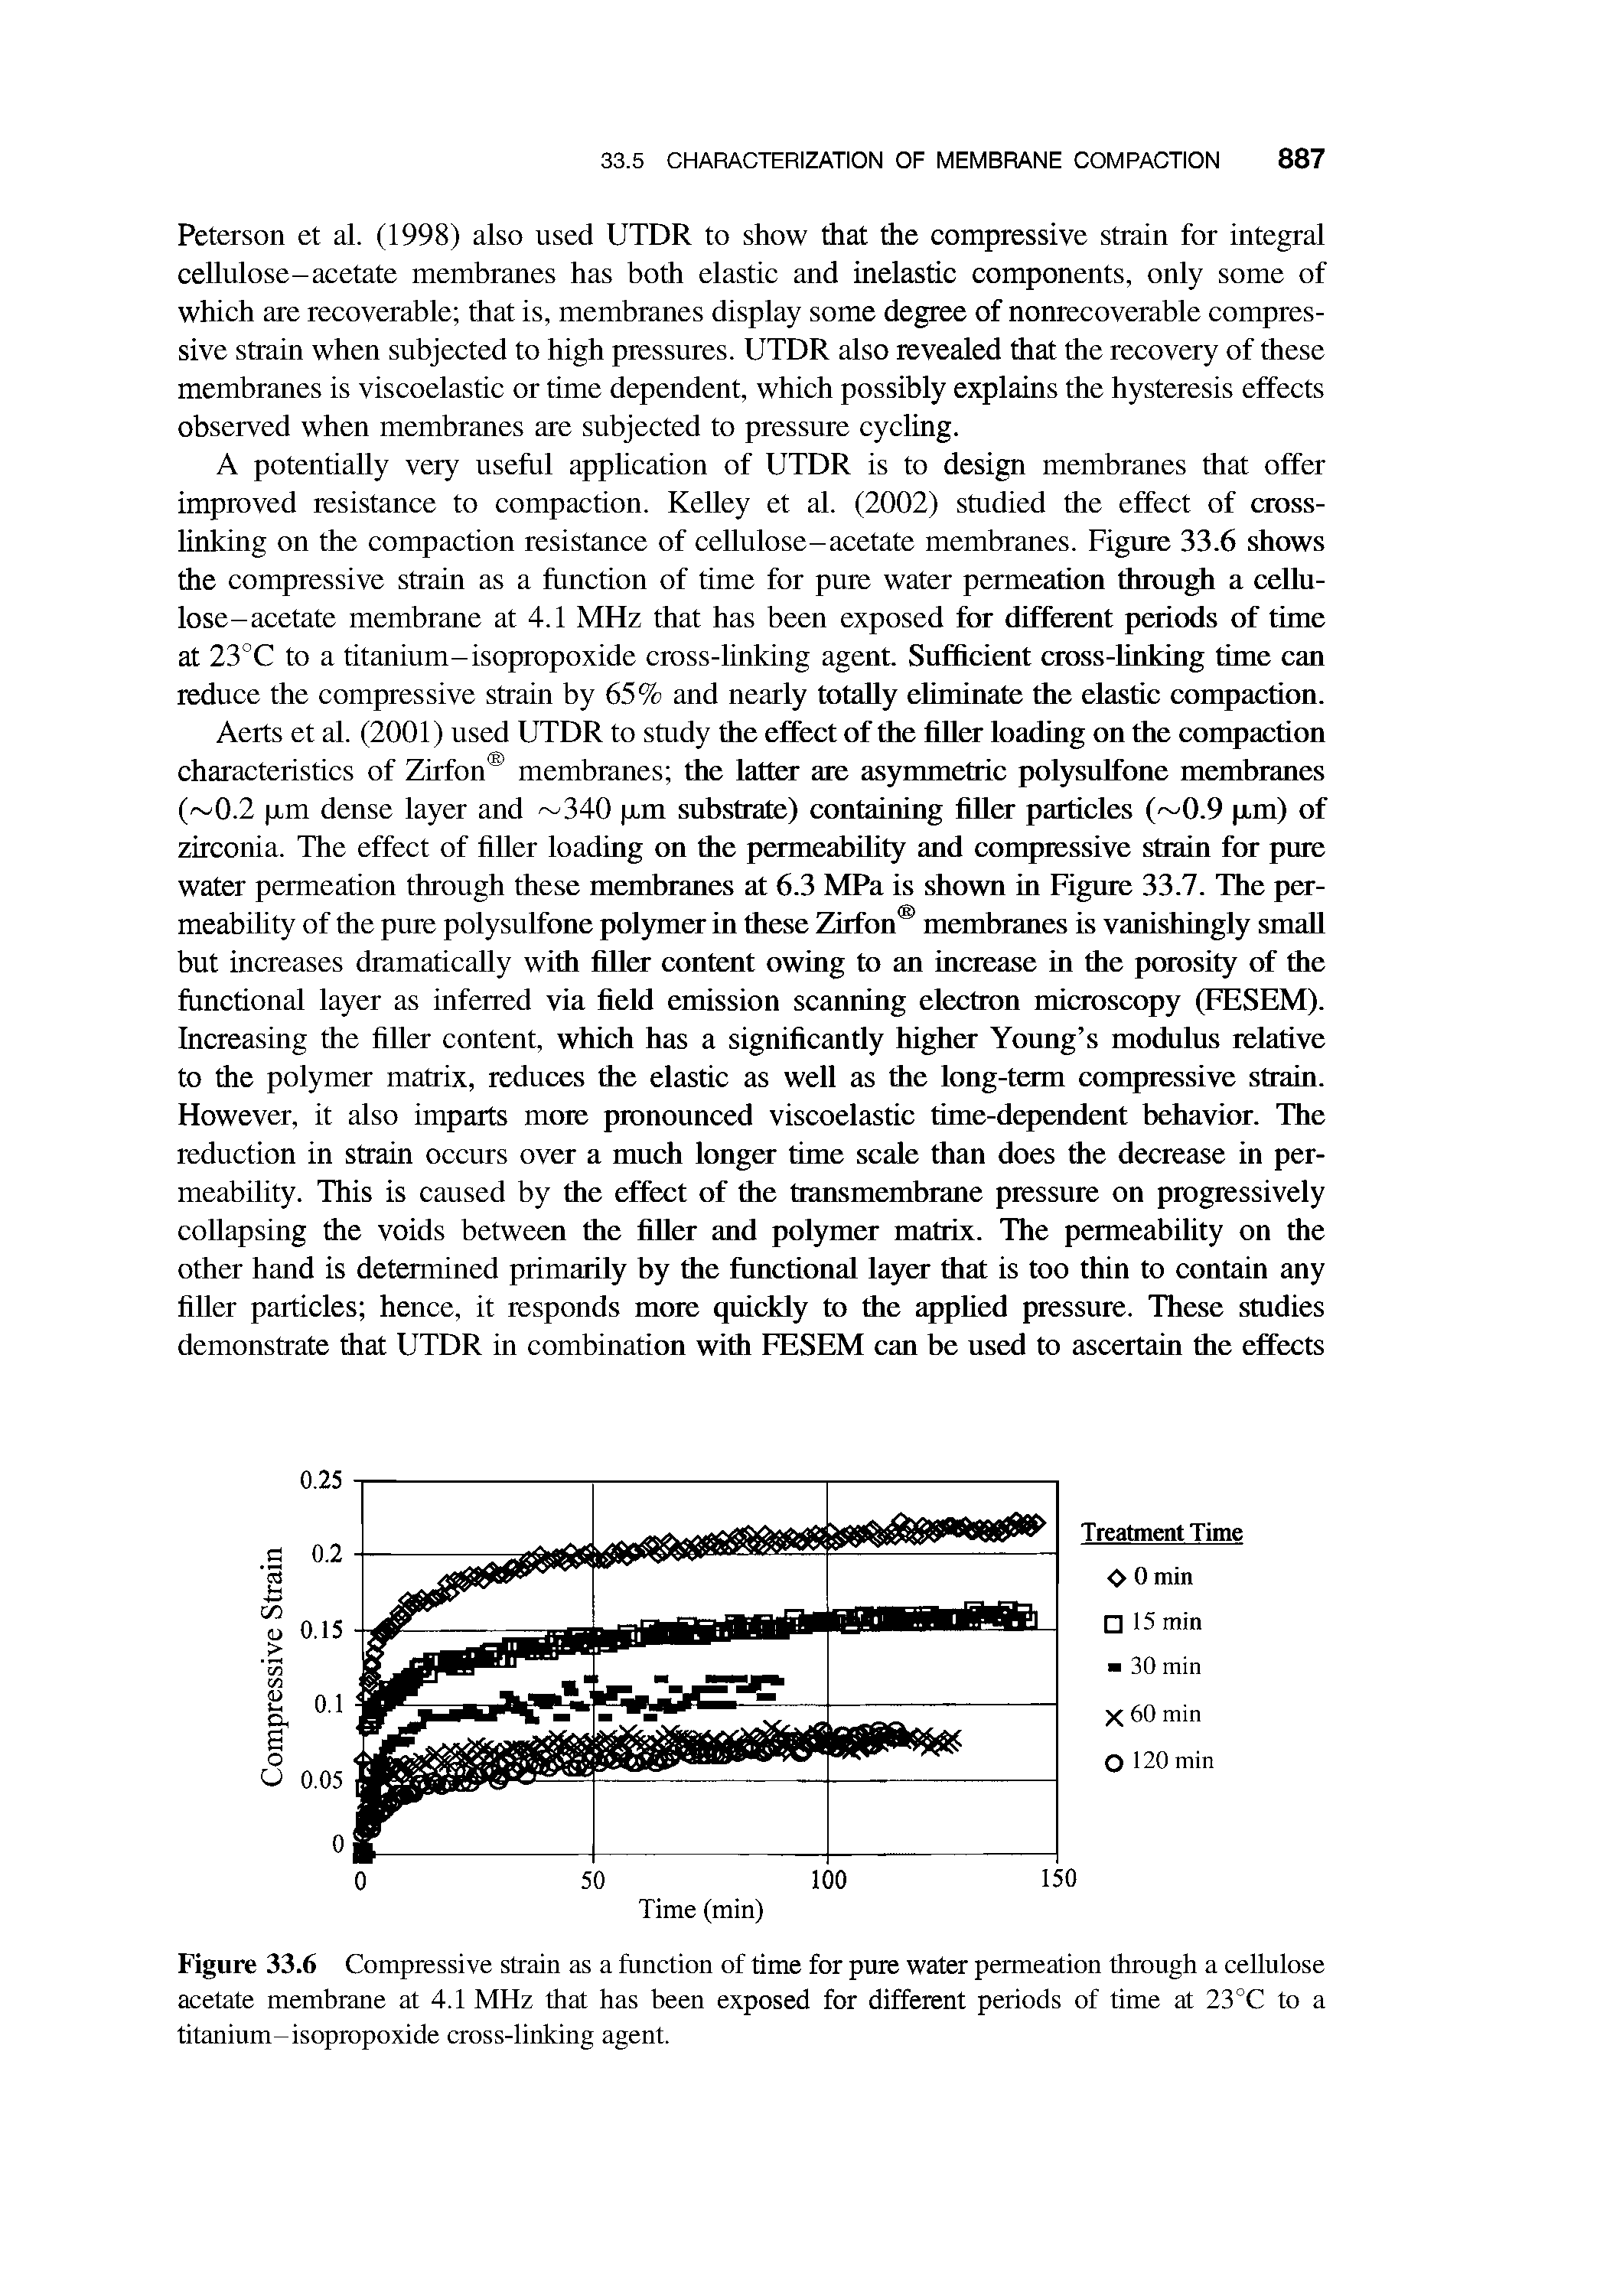 Figure 33.6 Compressive strain as a function of time for pure water permeation through a cellulose acetate membrane at 4.1 MHz that has been exposed for different periods of time at 23°C to a titanium-isopropoxide cross-linking agent.